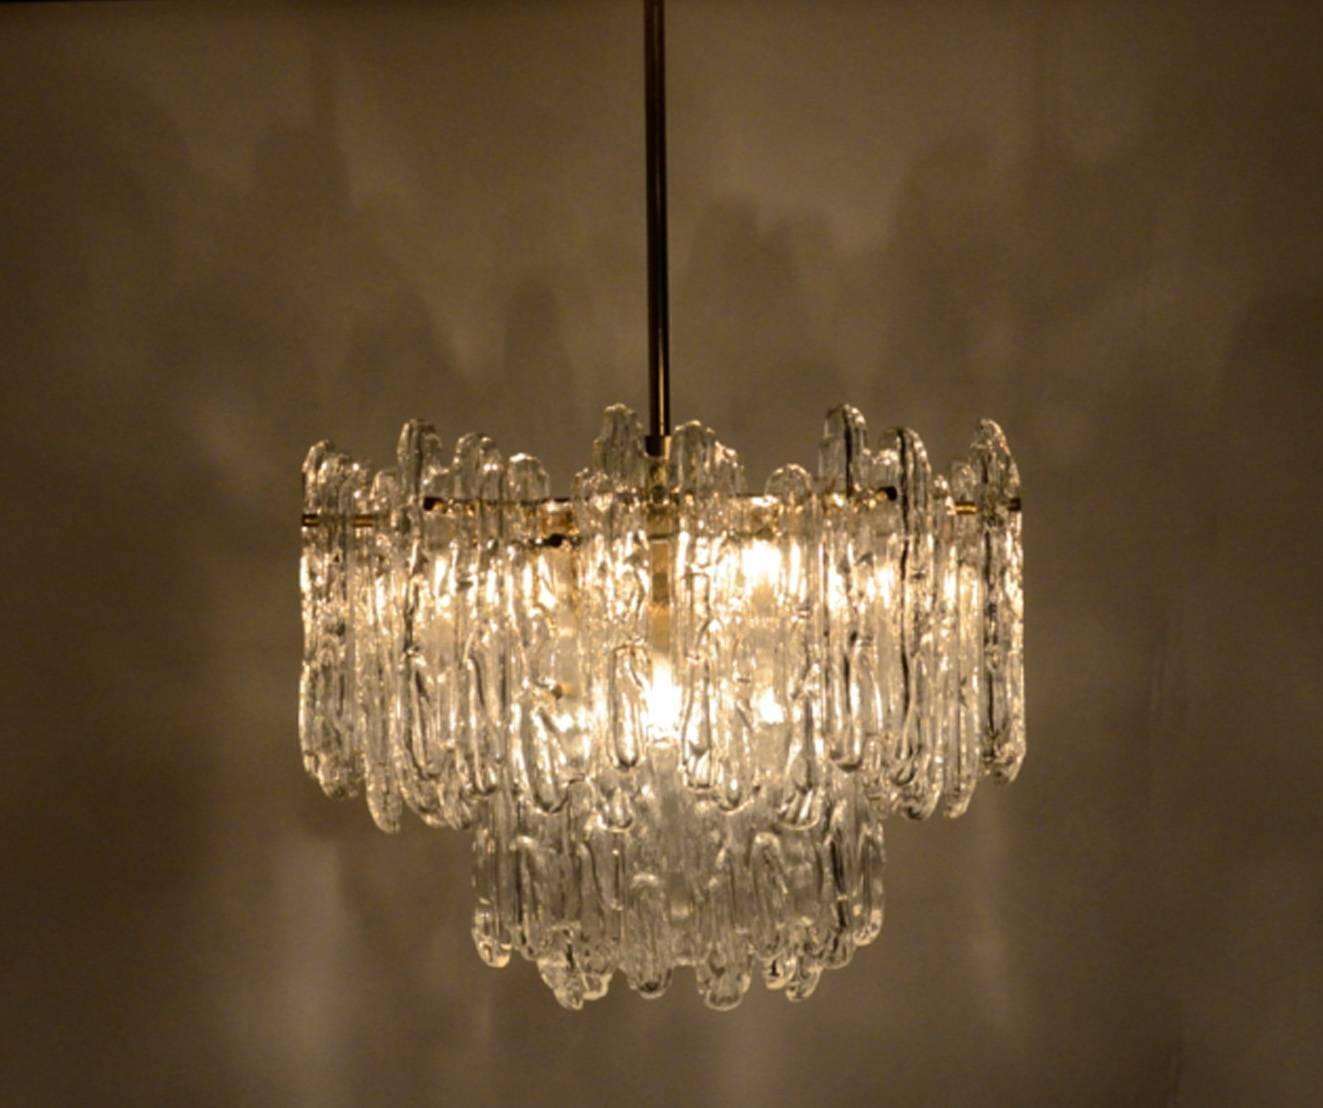 This modernist ice glass chandelier with 30 glasses was designed by the Kinkeldey design team during the 1970s, and manufactured in Germany. A very elegant Kinkeldey chandelier, it is comfortable with all decor periods. The pattern of the glass